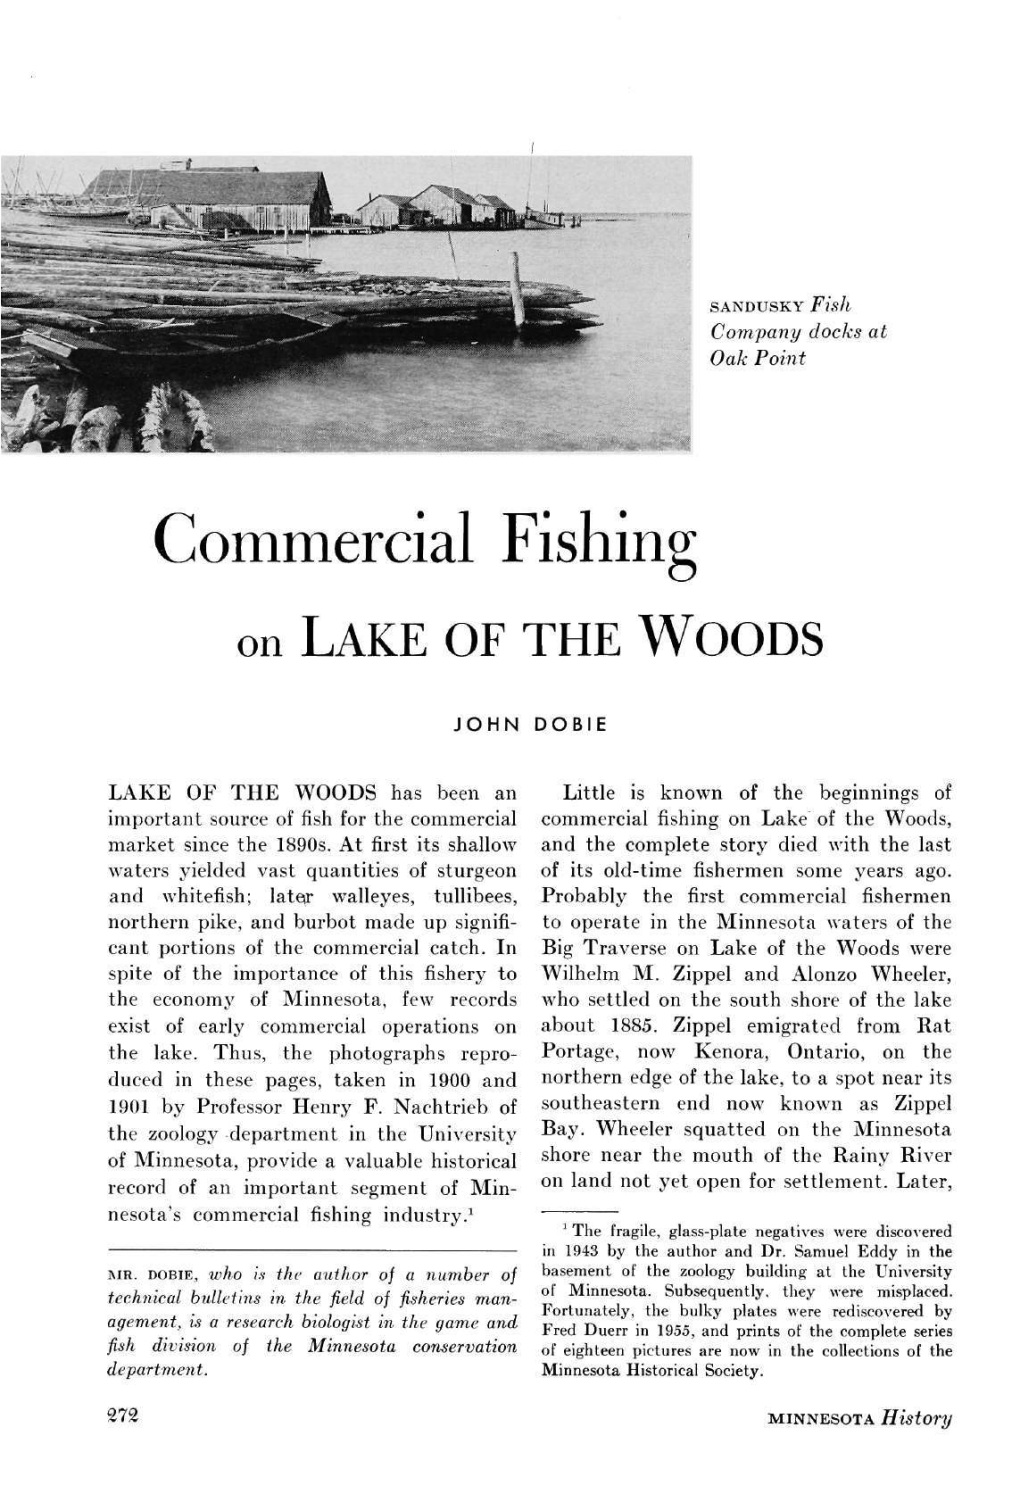 Commercial Fishing on Lake of the Woods